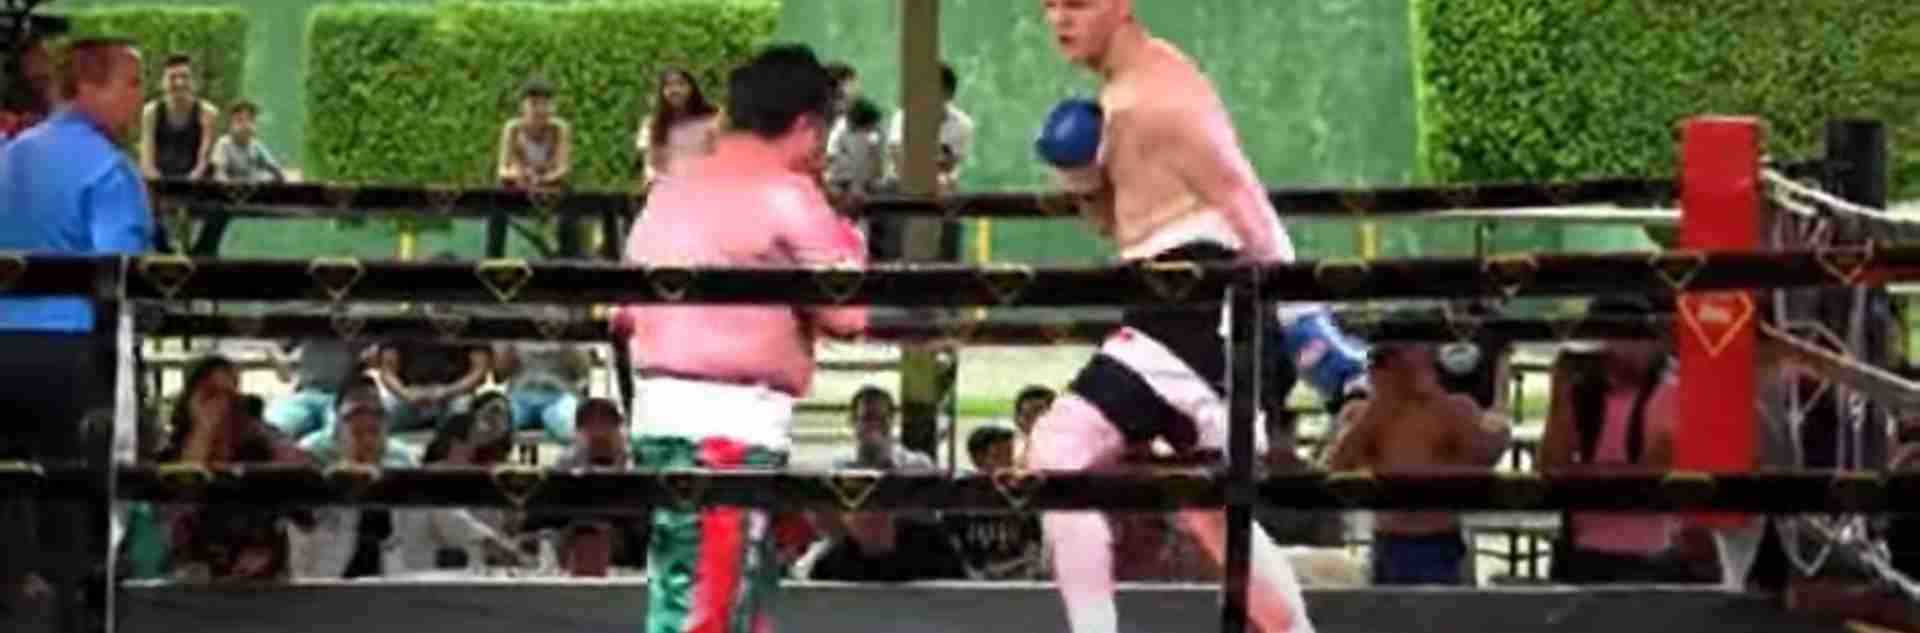 No. 3 Ranked US Amateur Heavyweight Knockout Debut In Colima, Mexico